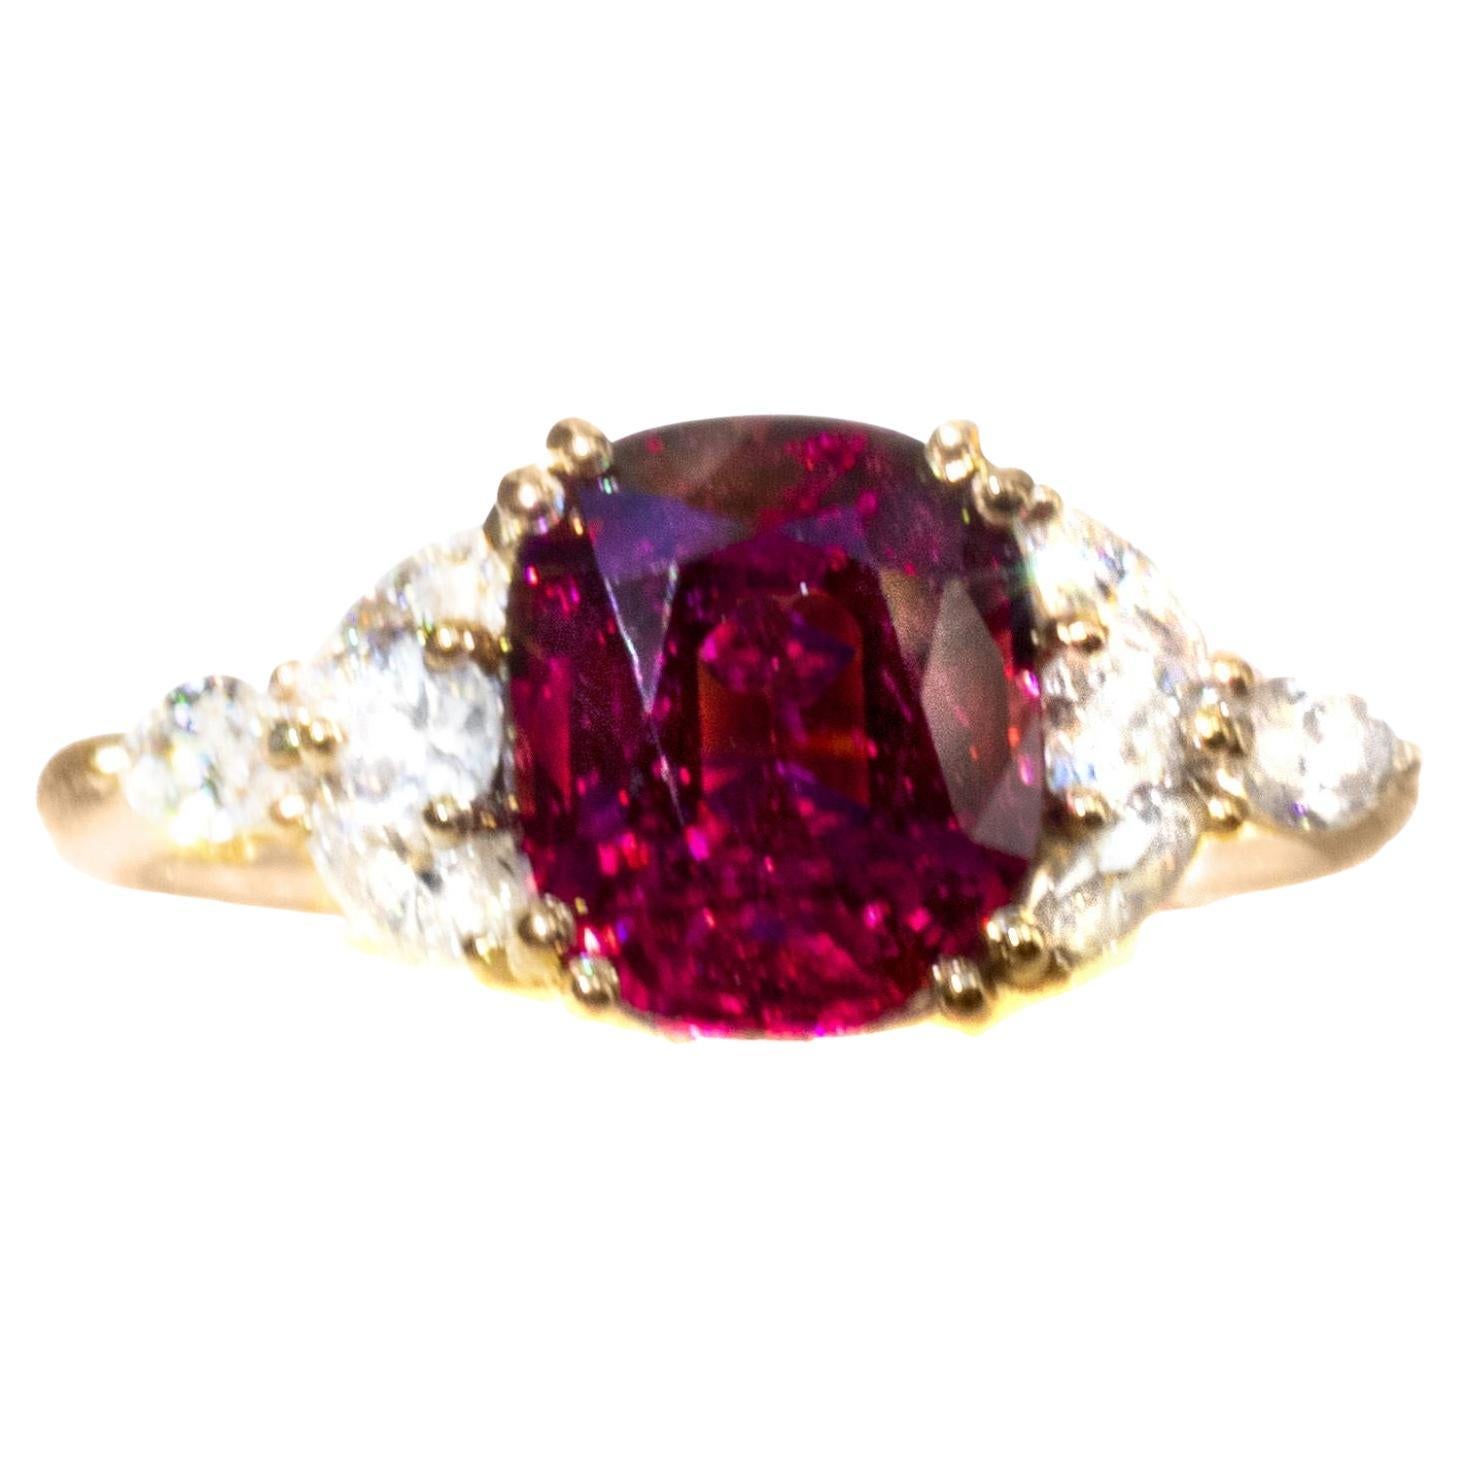 What is a spinel diamond?